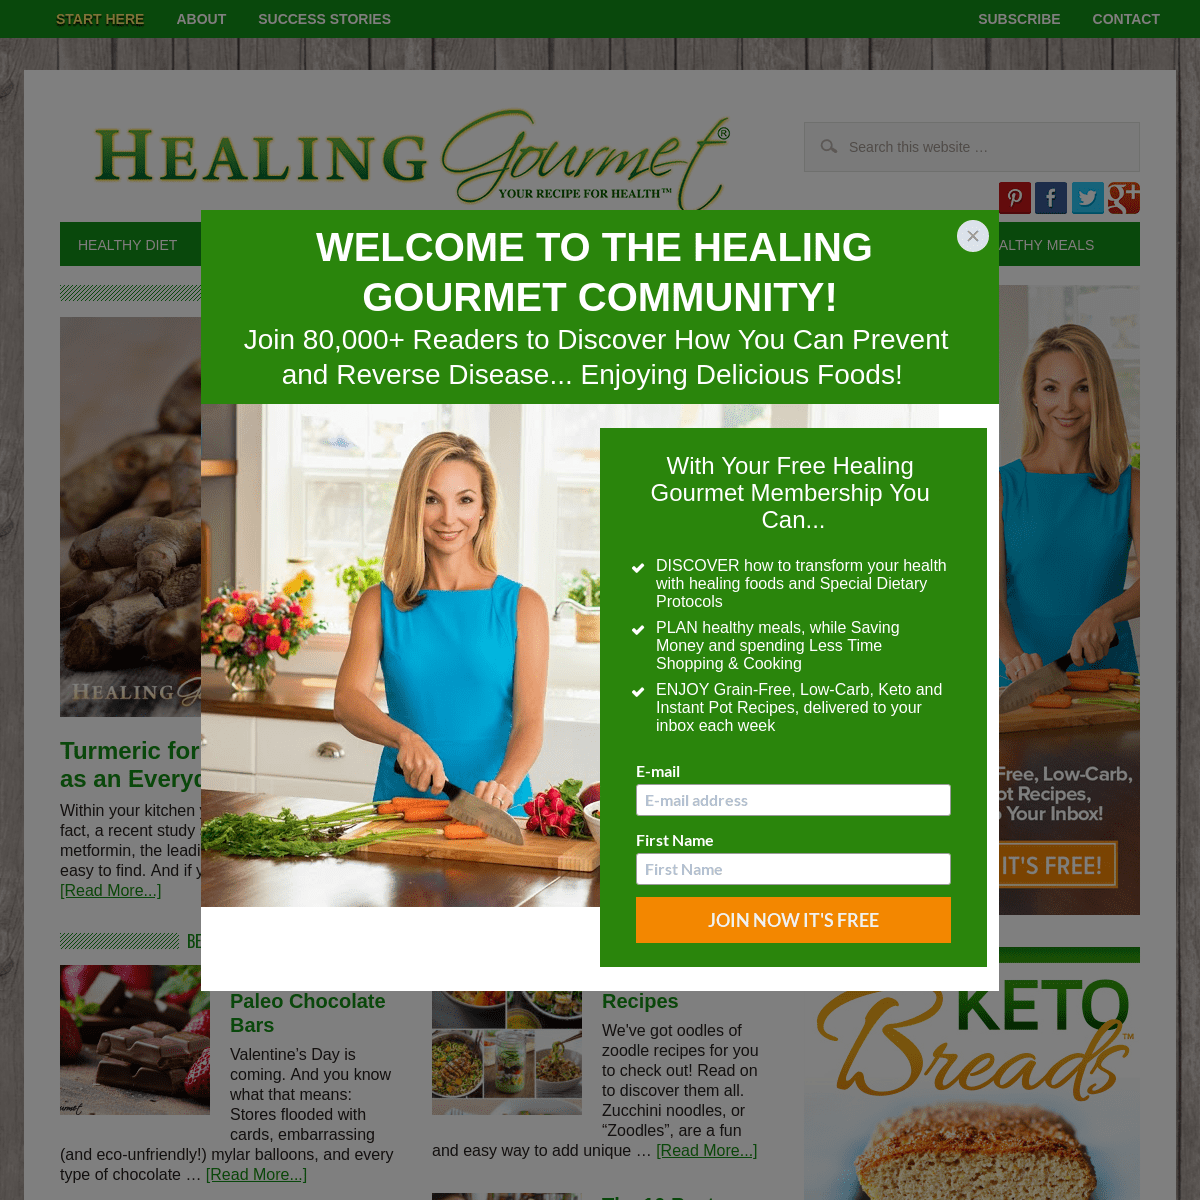 Healing Gourmet - Meal plans, diet plans and recipes for healthy eating, diabetes and weight loss.